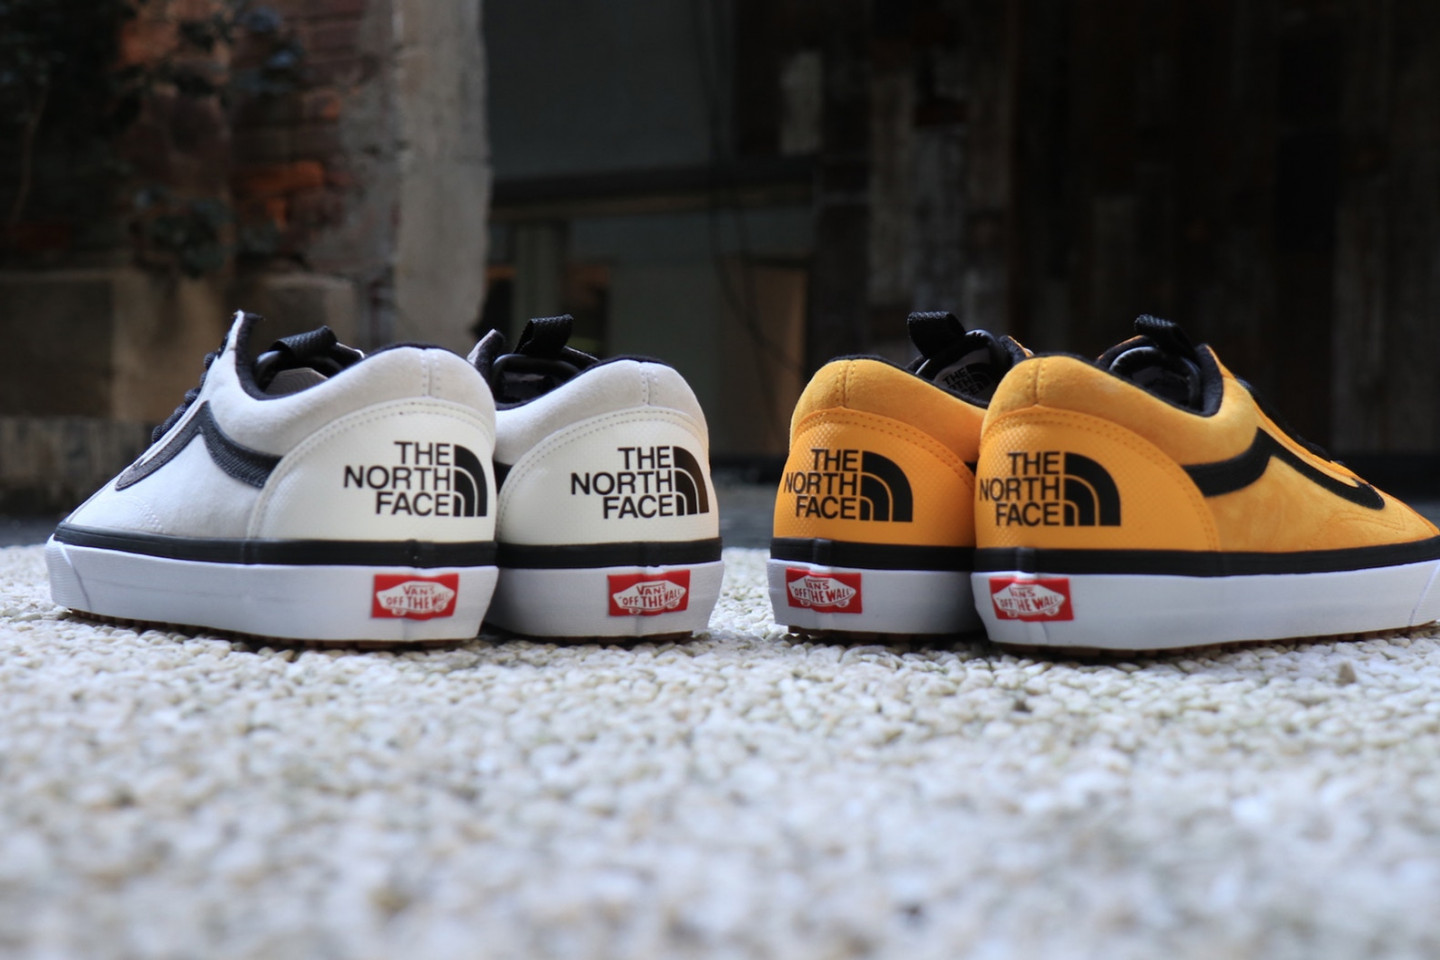 The North Face x Vans Collection Brings Us Something Special